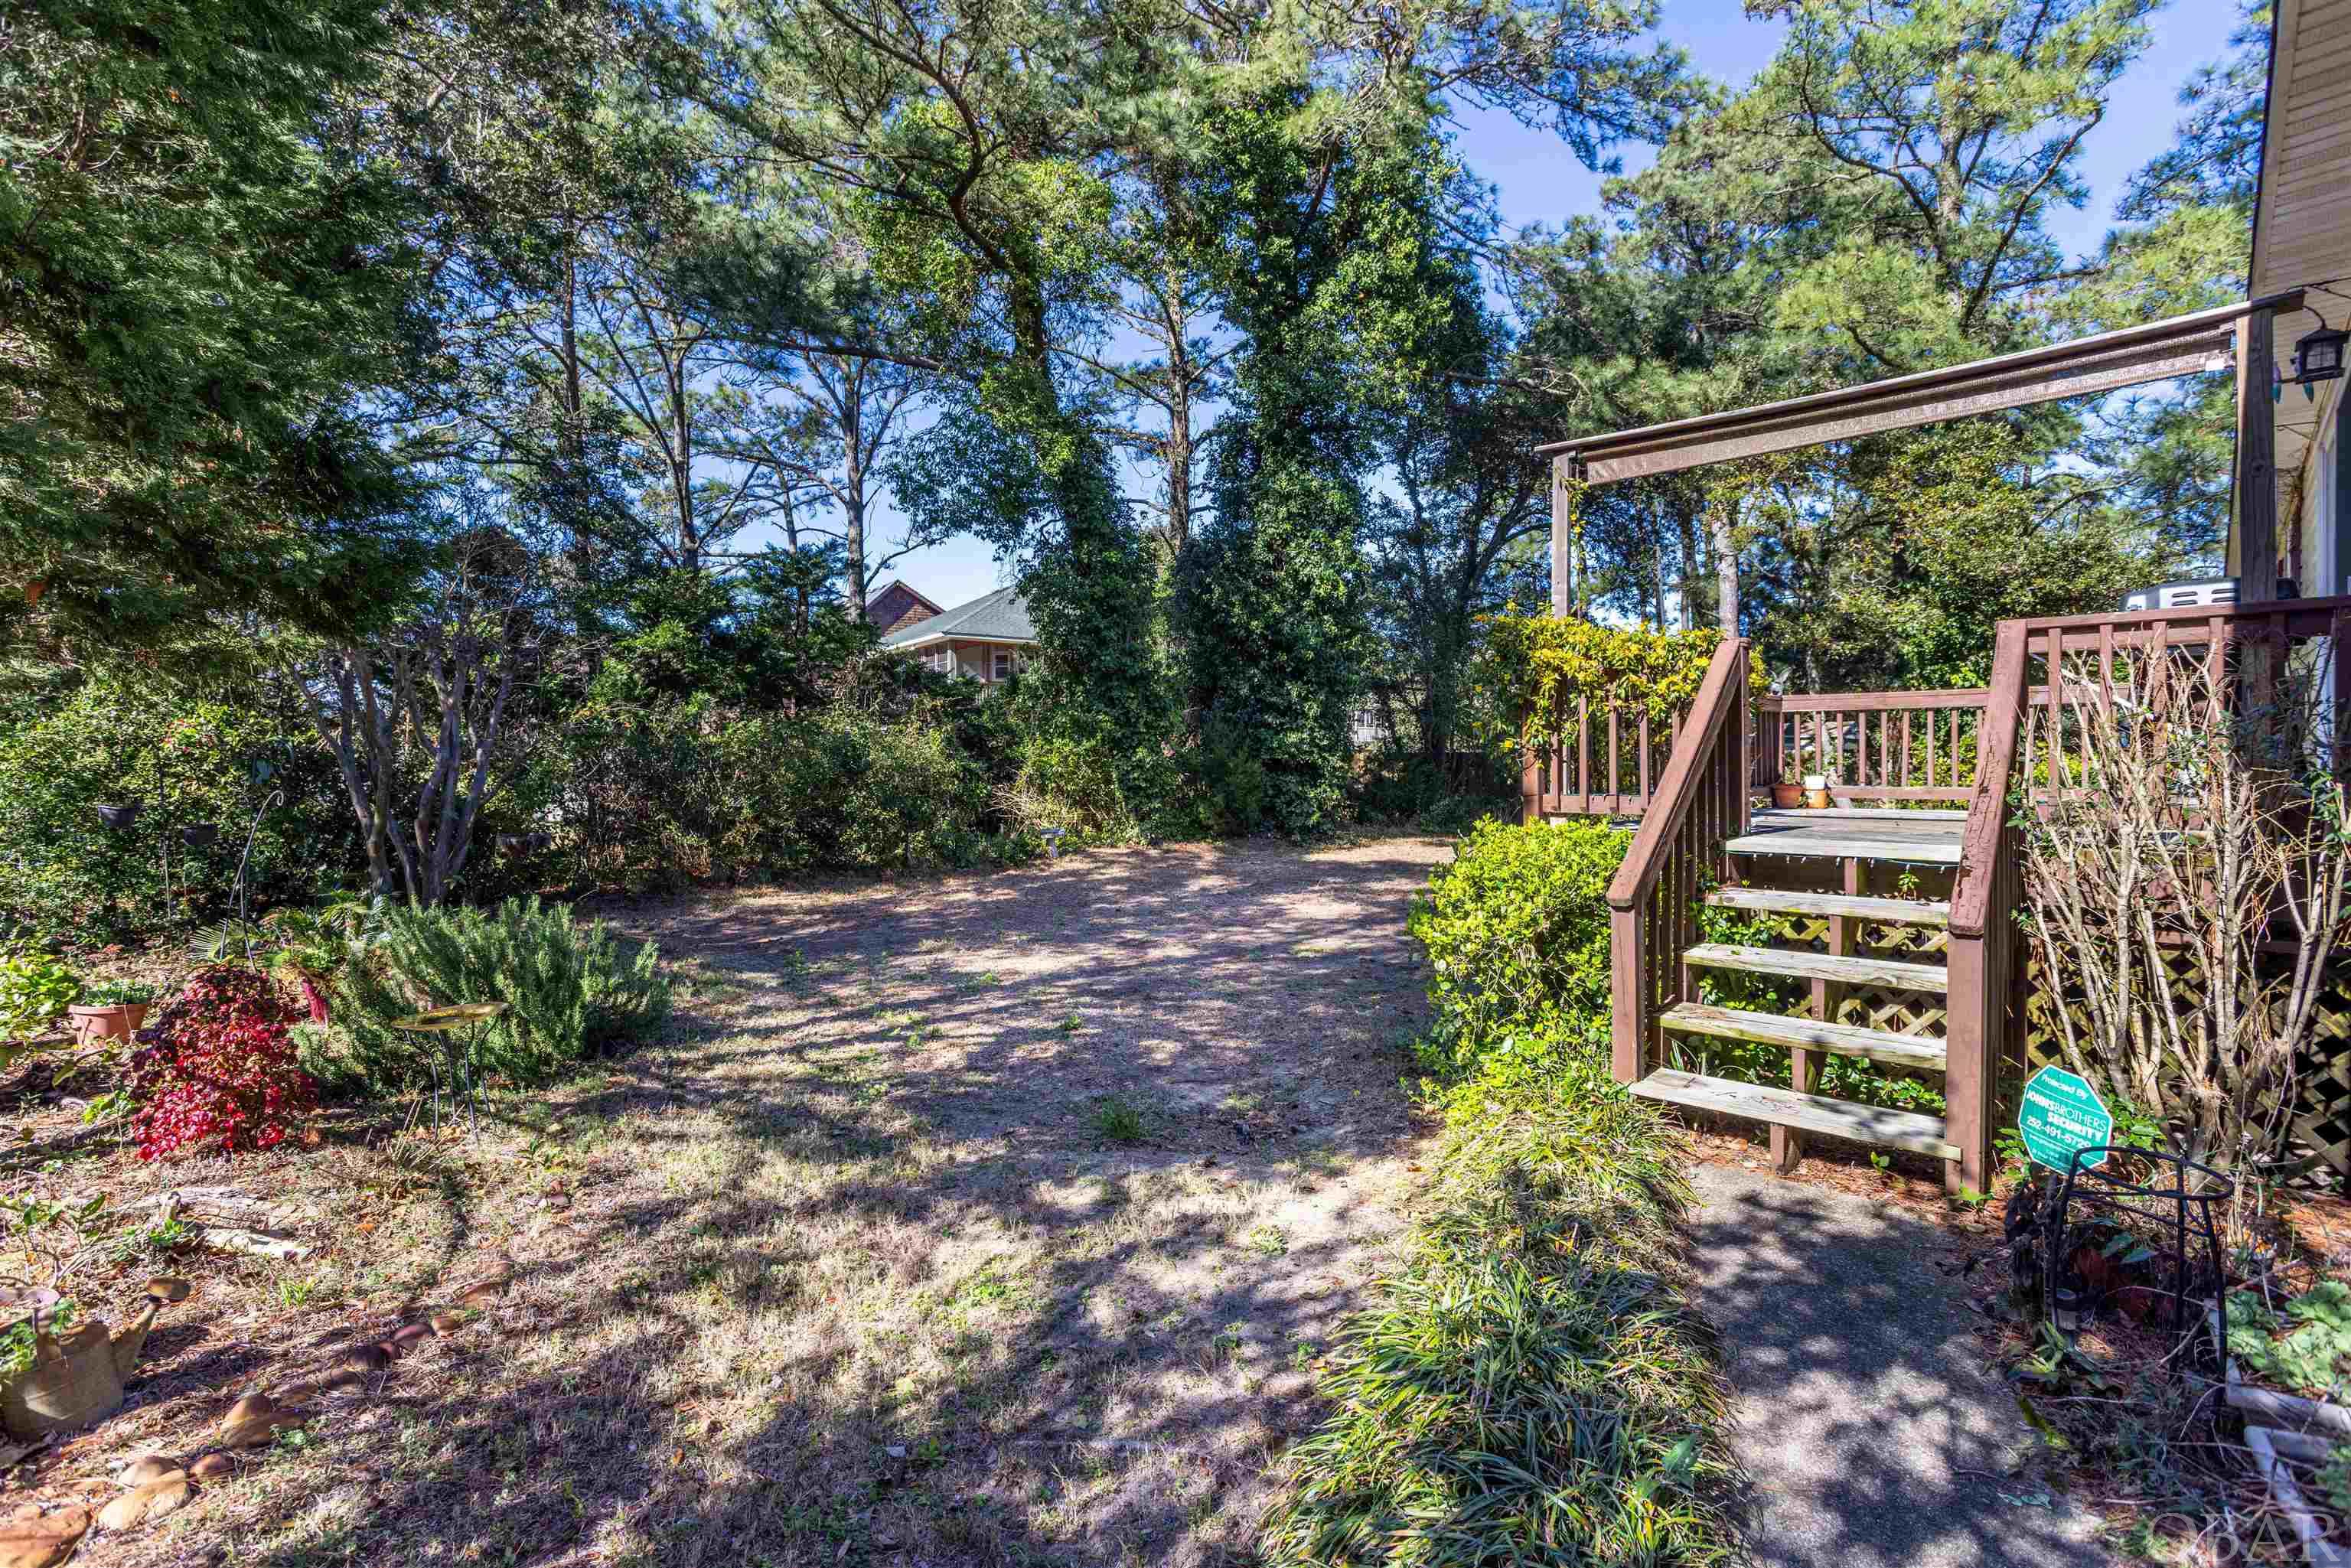 310 Pine Grove Trail, Kill Devil Hills, NC 27948, 3 Bedrooms Bedrooms, ,2 BathroomsBathrooms,Residential,For sale,Pine Grove Trail,124923